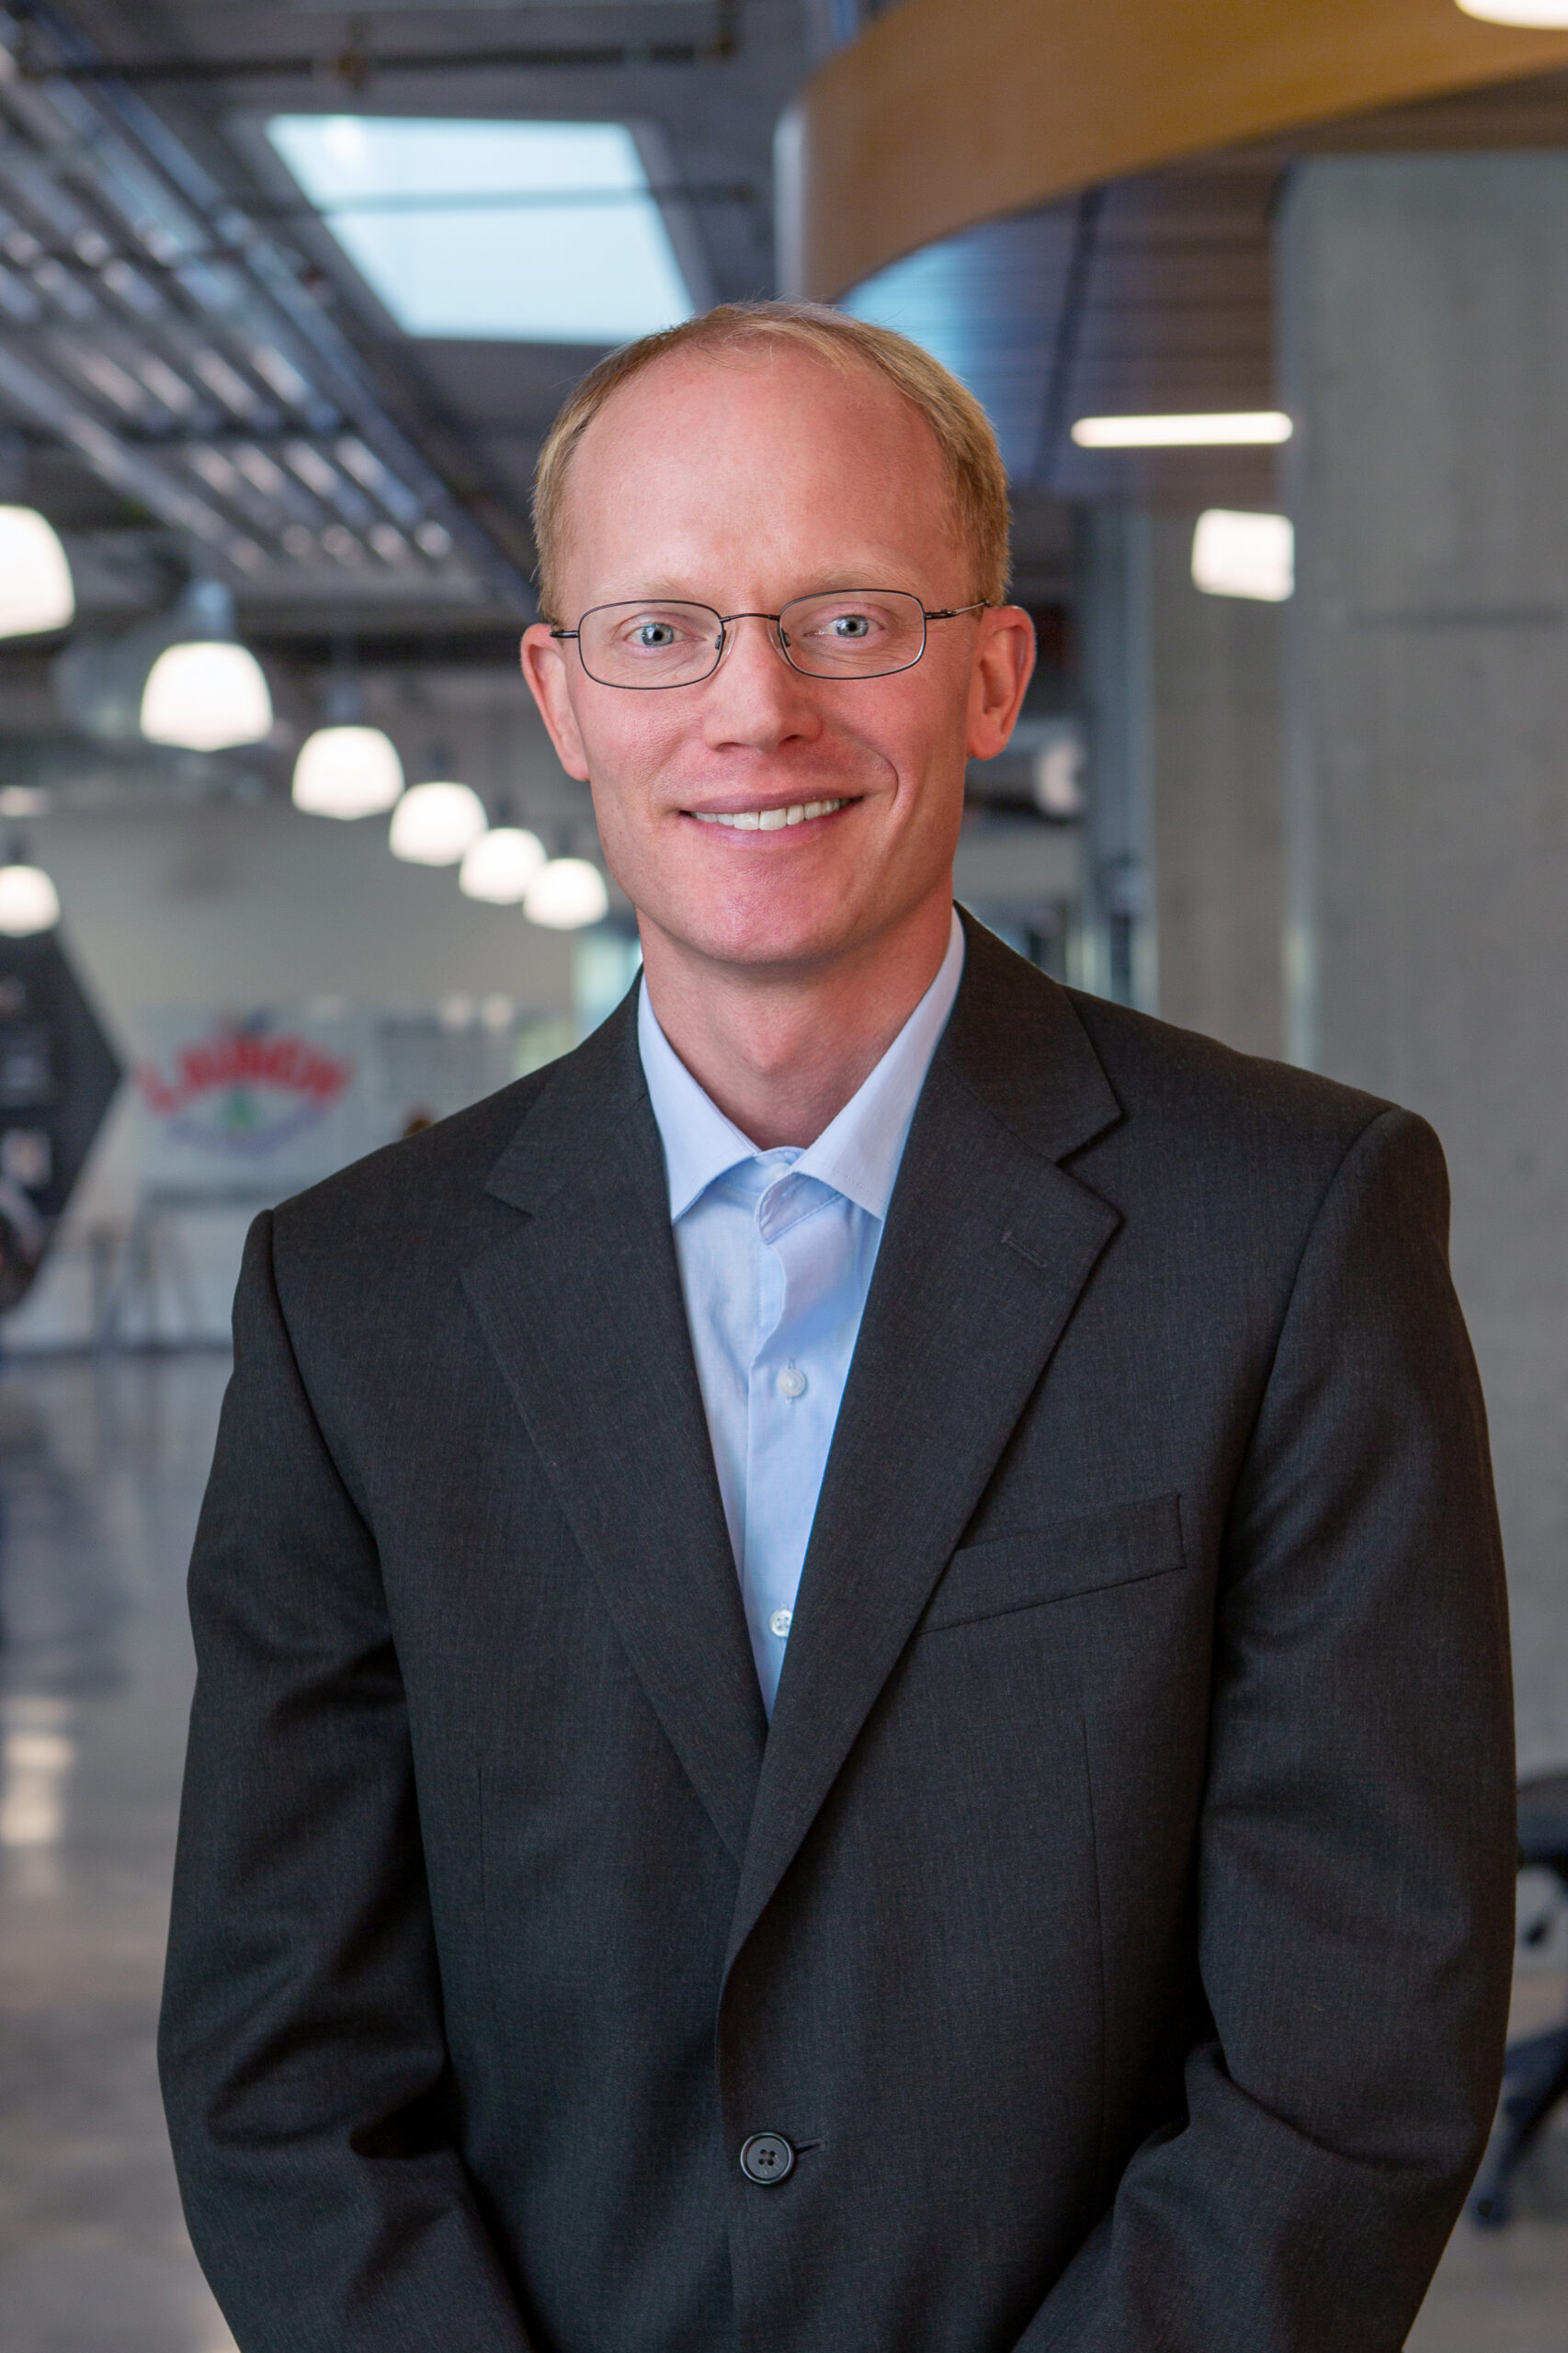 Thad Kelling is the director of public relations and marketing at the Lassonde Entrepreneur Institute, an interdisciplinary division of the David Eccles School of Business at the University of Utah.